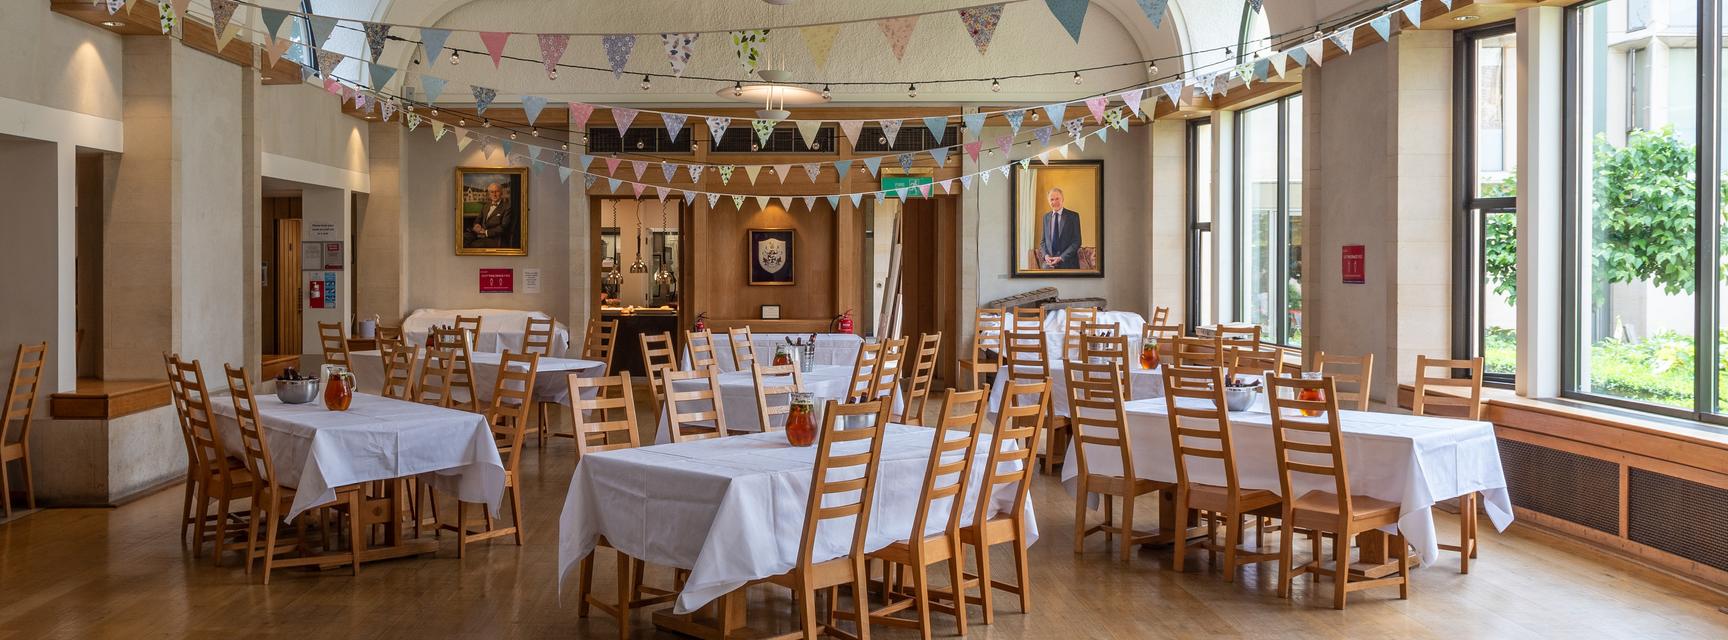 St Cross hall with bunting and tables arranged for intimate event